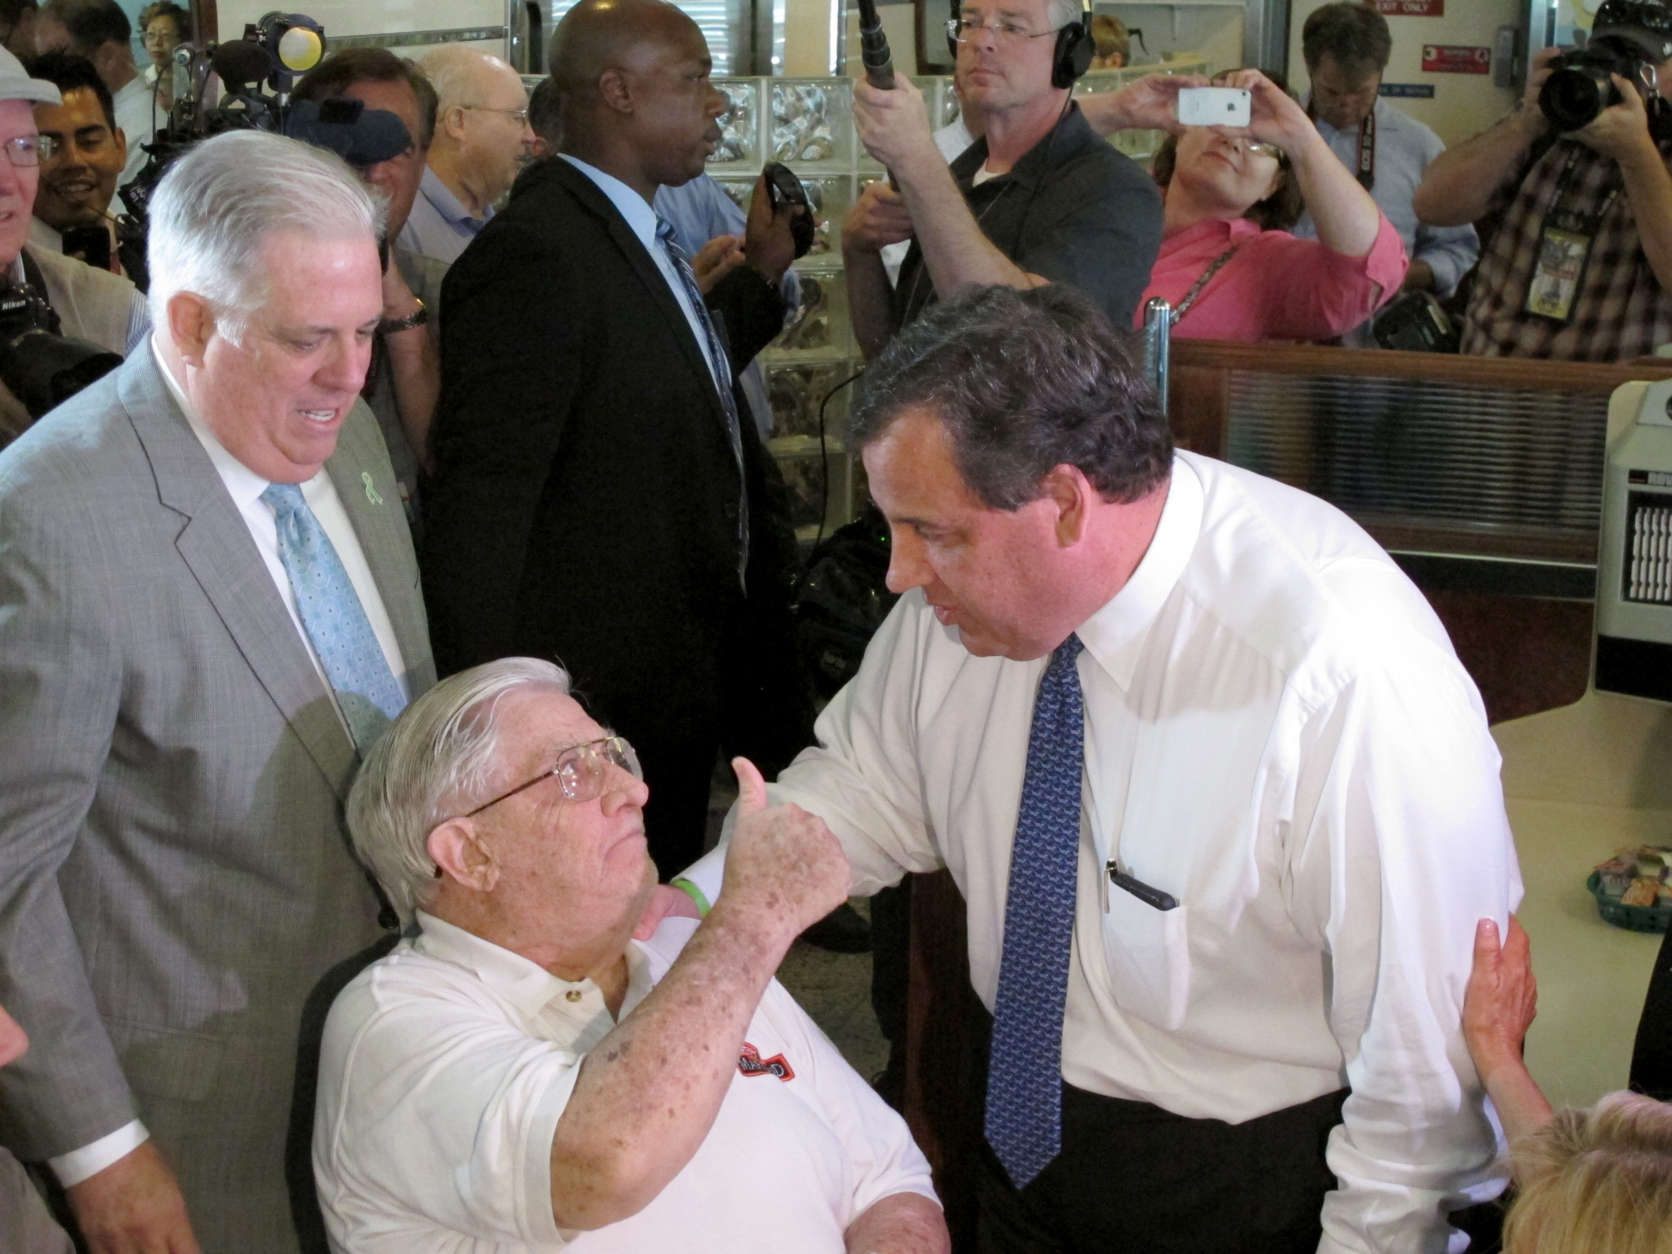 Former Maryland Rep. Larry Hogan, Sr., who is the father of Maryland Gov. Larry Hogan, gives a thumbs up to New Jersey Gov. Chris Christie, who made a campaign stop at a diner near Annapolis, Md., on Wednesday, July 15, 2015. Gov. Hogan, who endorsed Christie's presidential bid, is standing behind his father. (AP Photo/Brian Witte)